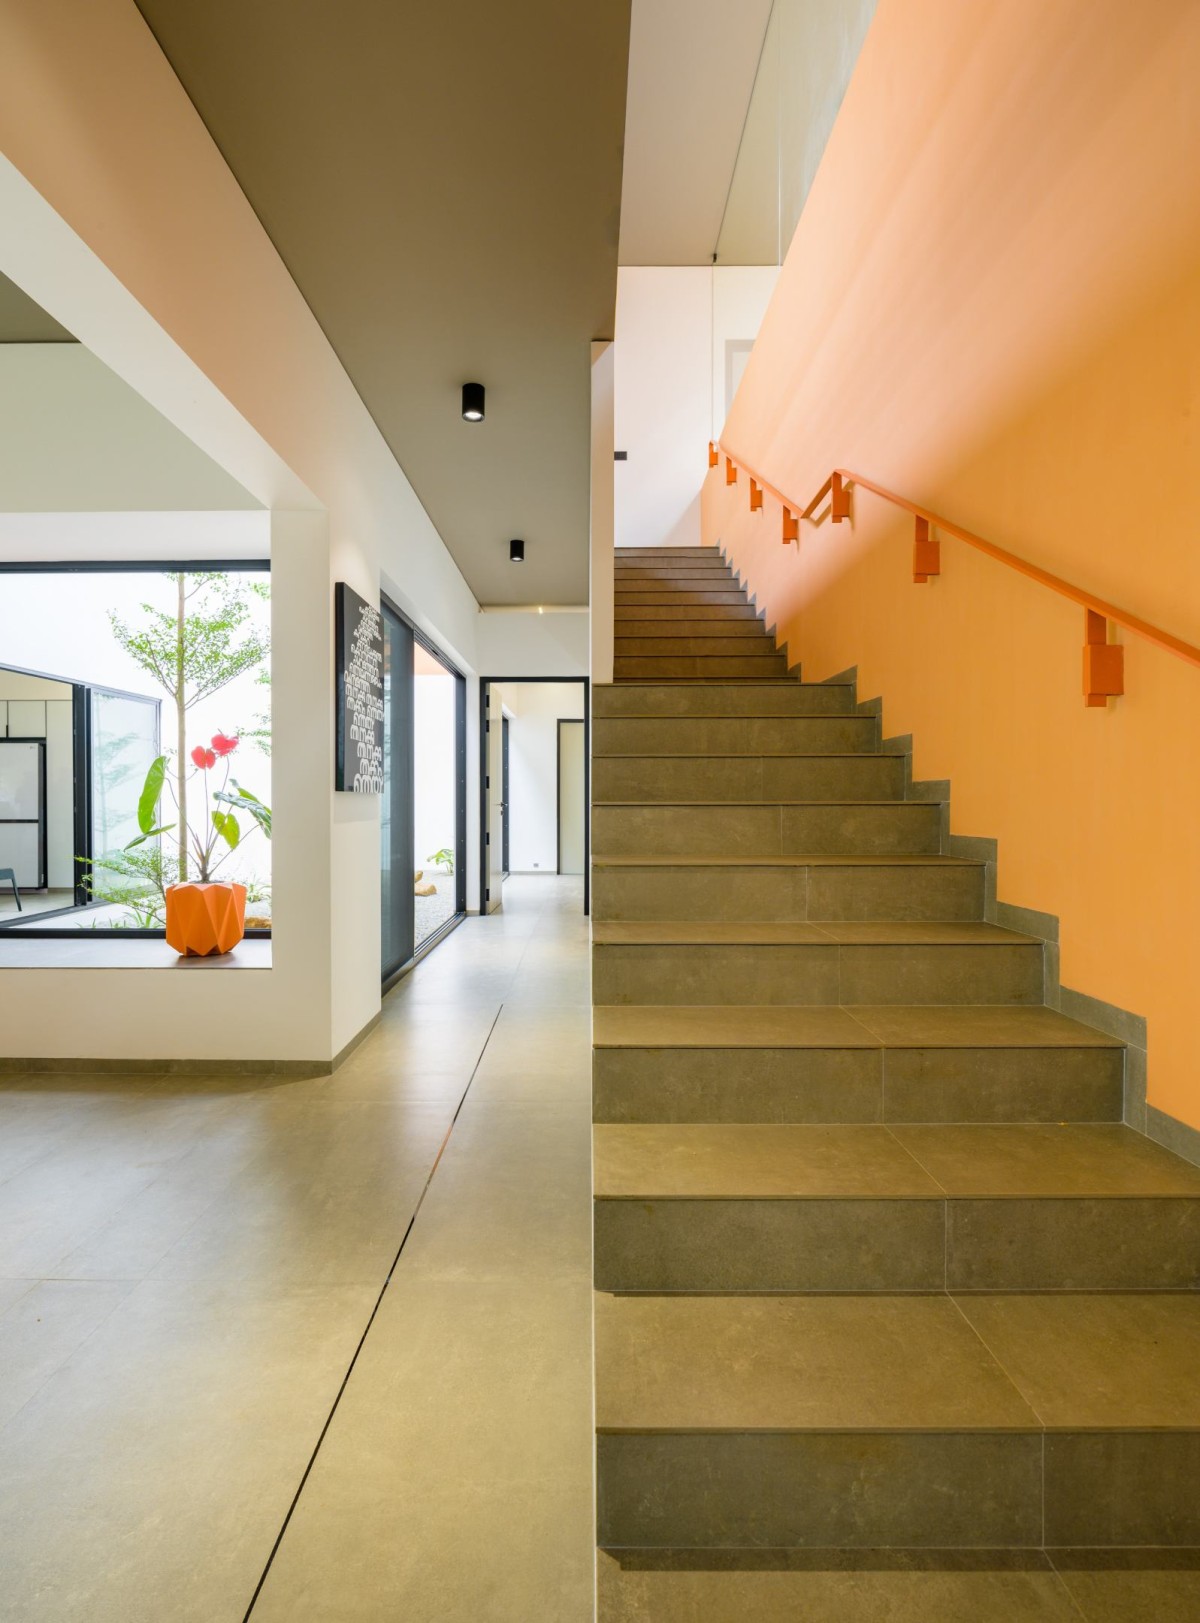 Staircase Area of The Colour Burst House by LIJO.RENY.architects